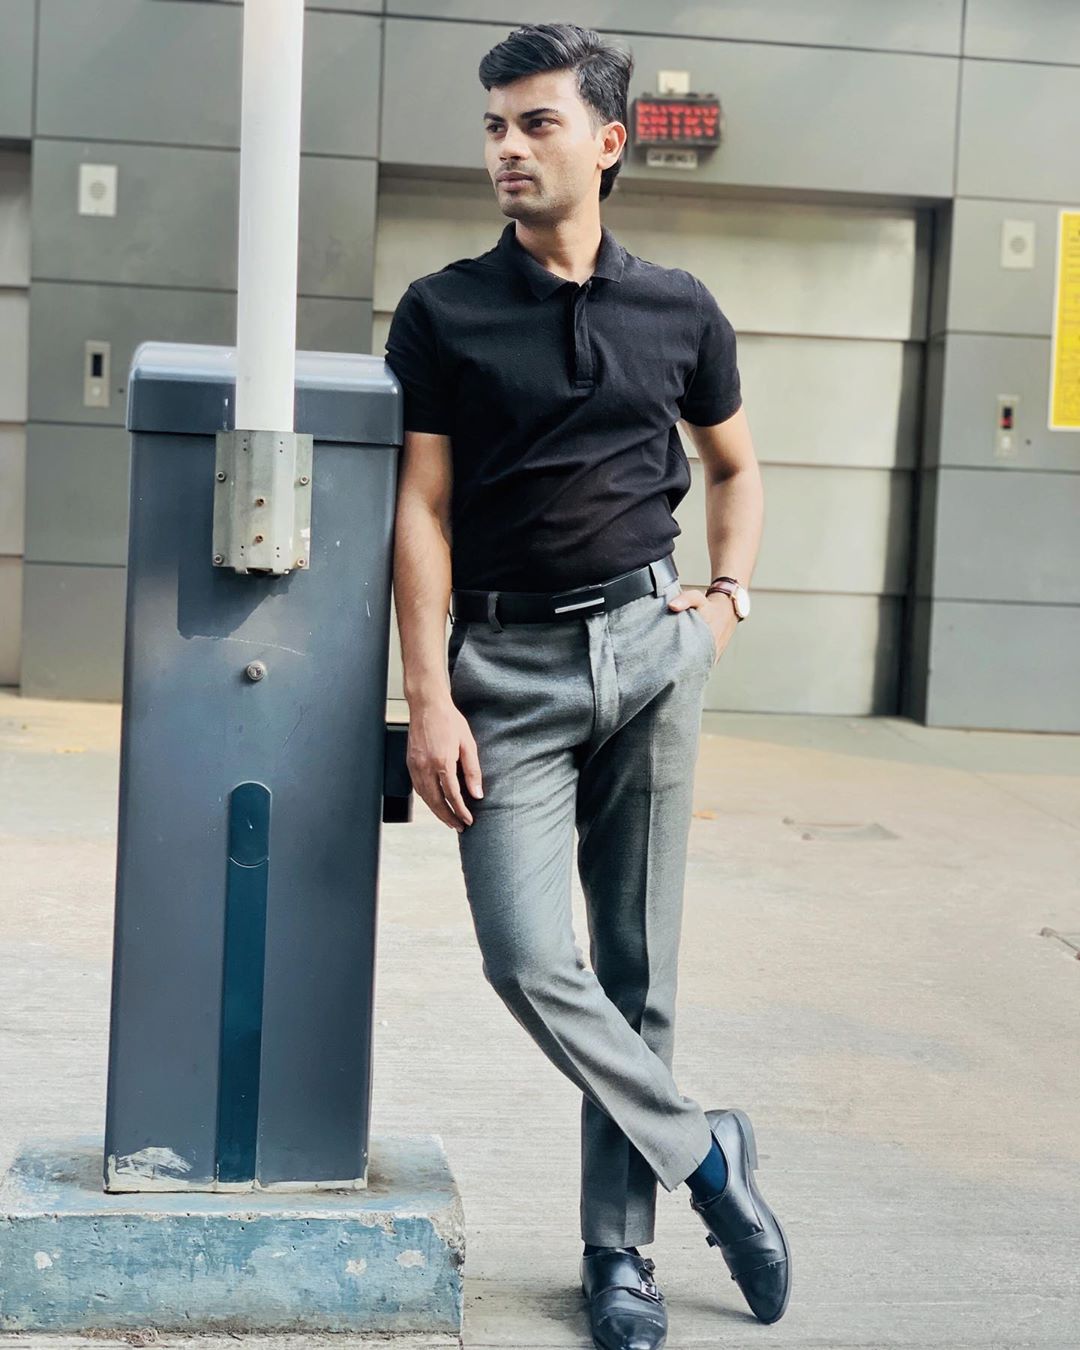 MYNTRA - You can dress up for a party at home. It’s the weekend afterall. 📸 @menpantomath 
Look up product code: 11941712 / 11465780 / 10029399
For more style inspiration, look up the binge-worthy fas...